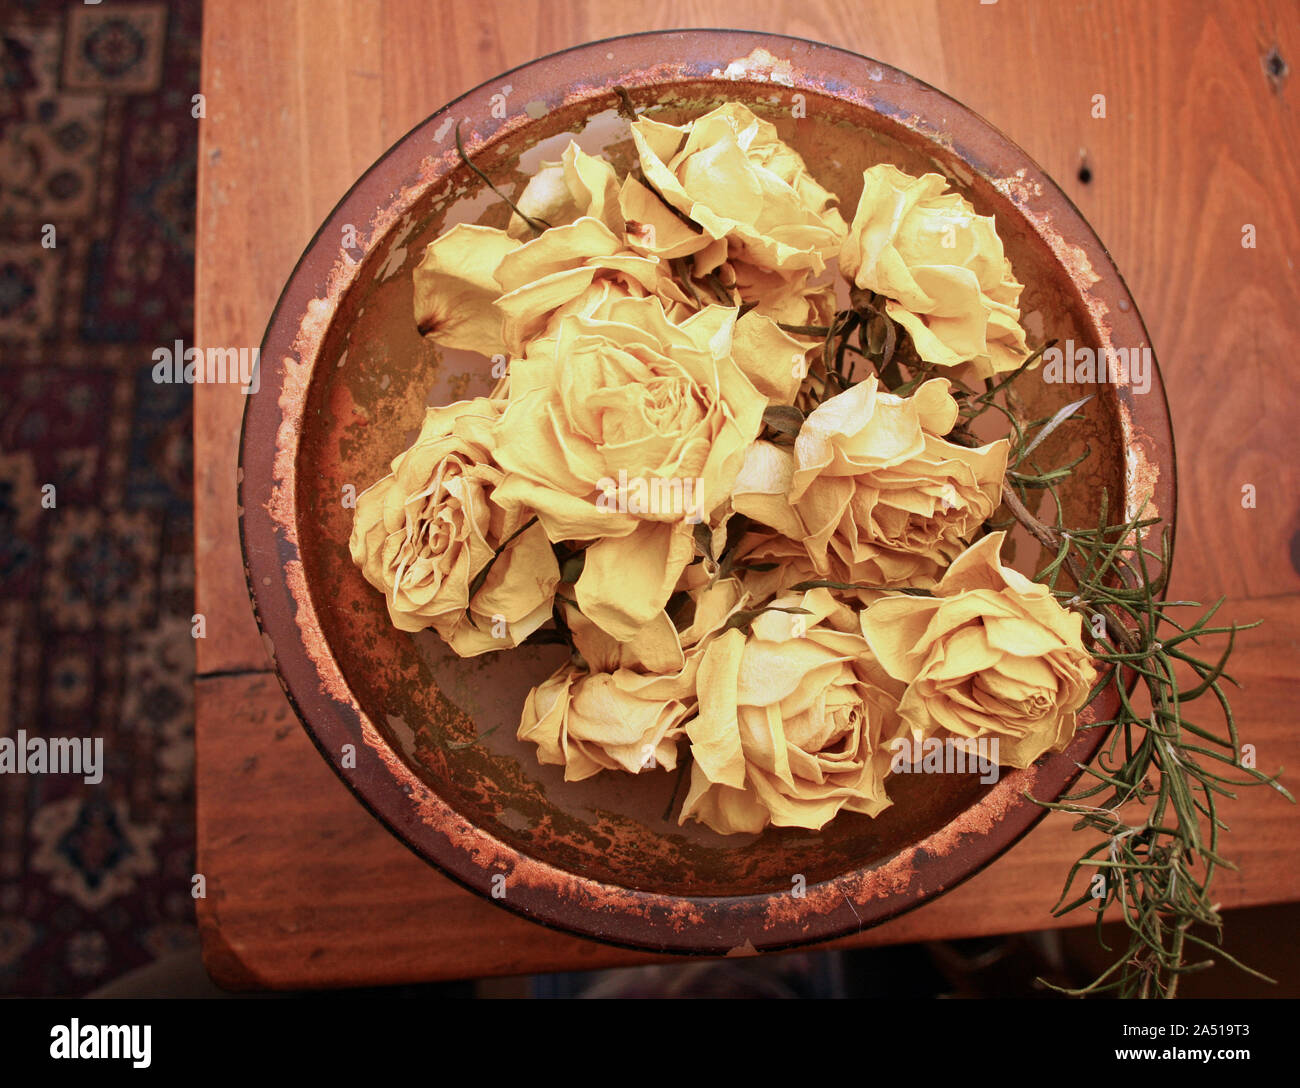 Dried yellow roses in glass bowl on a wooden table taken from above Stock Photo